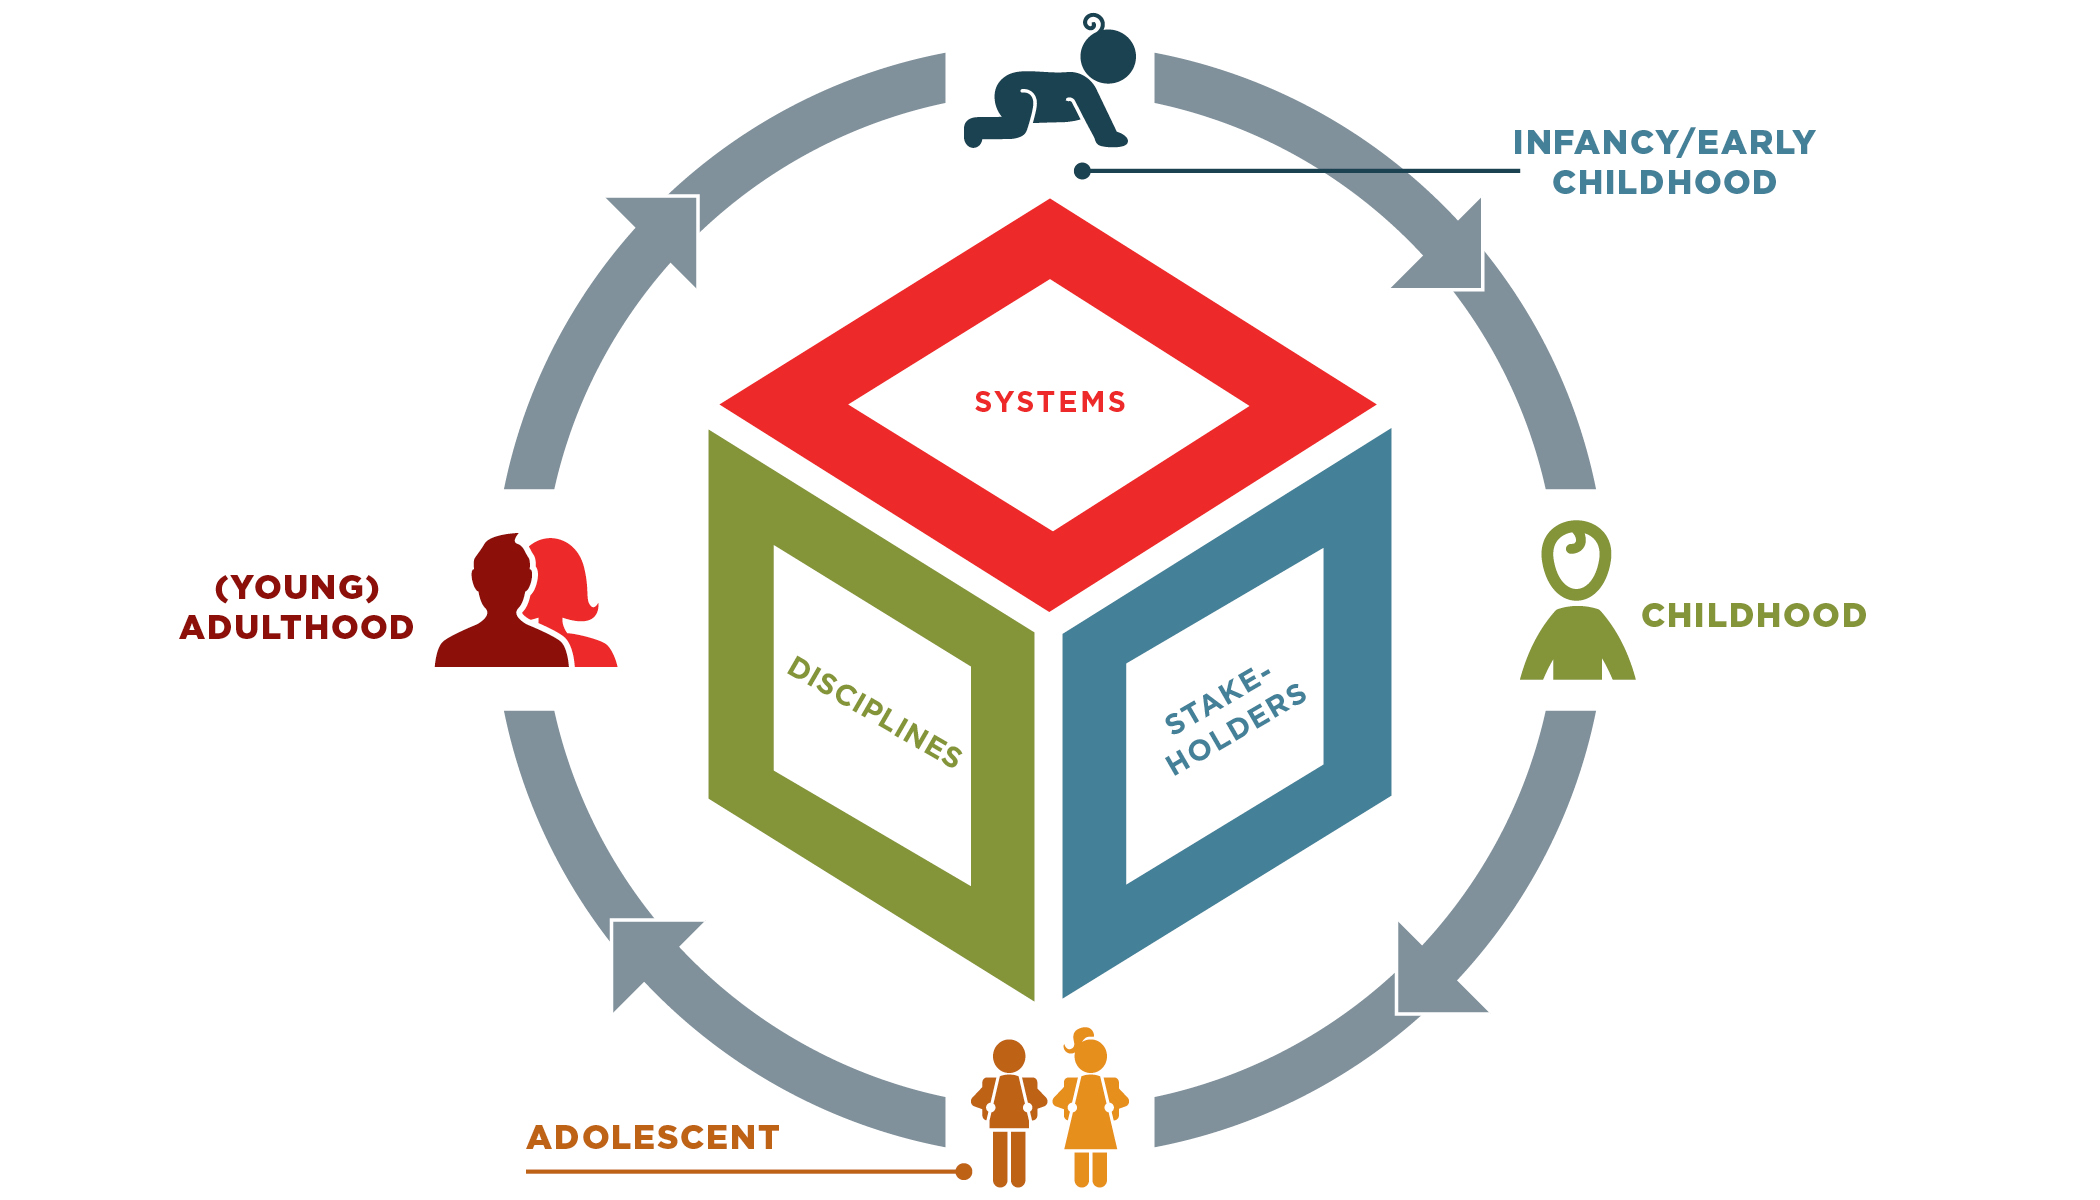 Cube in middle of picture with "systems", "disciplines", and "stakeholder" on three sides. Cube is encased by circle with arrows tha show baby with "infancy/early childhood", child with "childhood", kid figures with "adolescent", and man and woman figures with "(young) adulthood)"